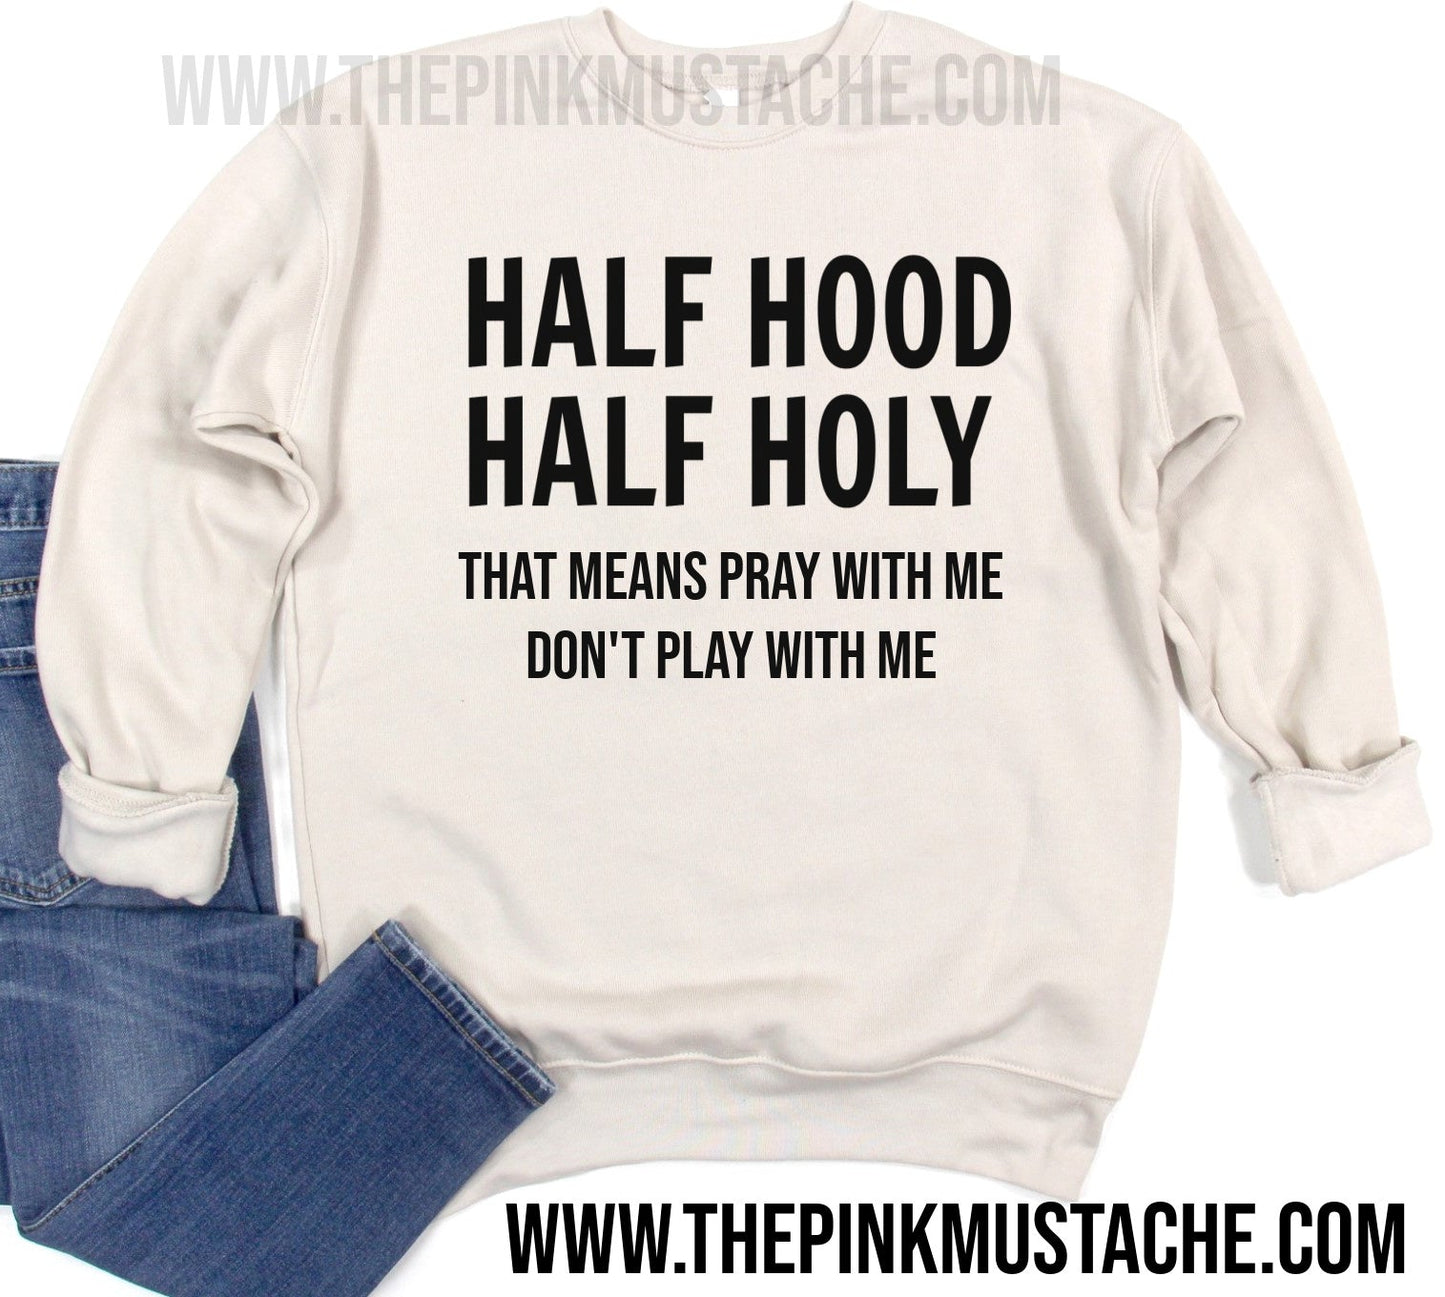 Half Hood Half Holy - That Means Pray With Me Don't Play With Me - Super Soft Oversized Sweatshirt / Bella Canvas Quality Sweatshirt